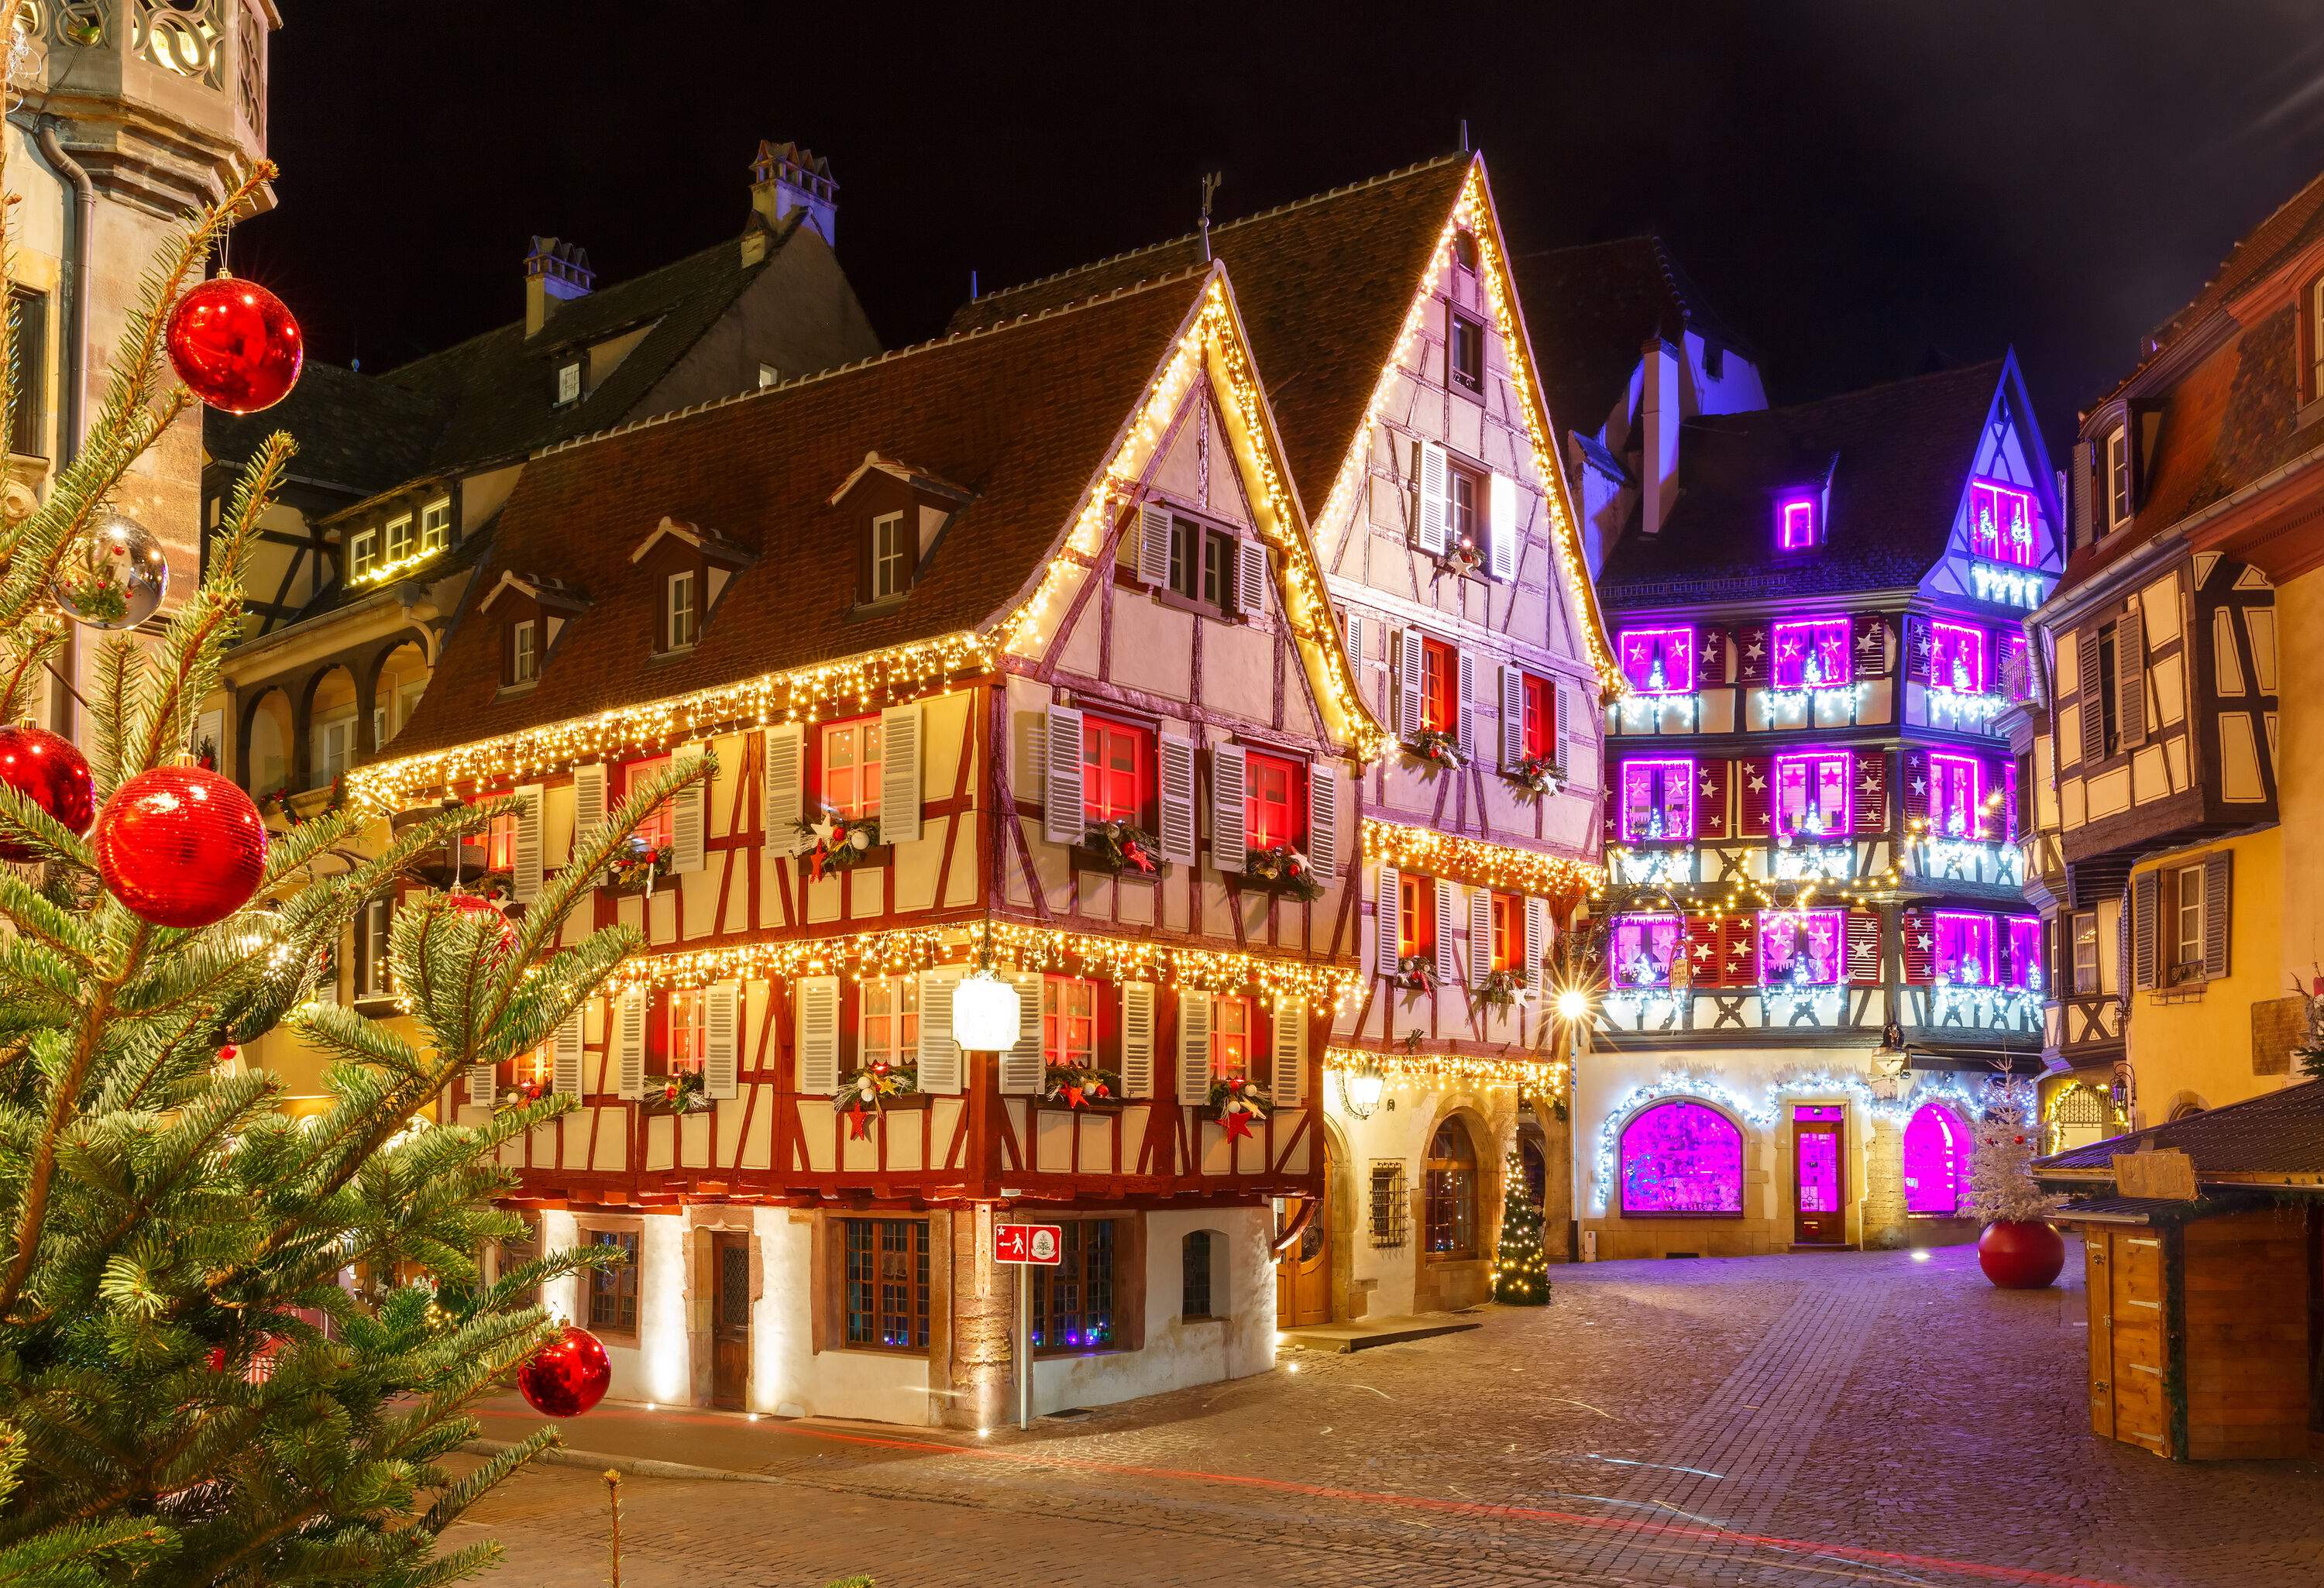 Half-timbered houses are brightly illuminated with Christmas lights and decorated with various colourful Christmas ornaments.